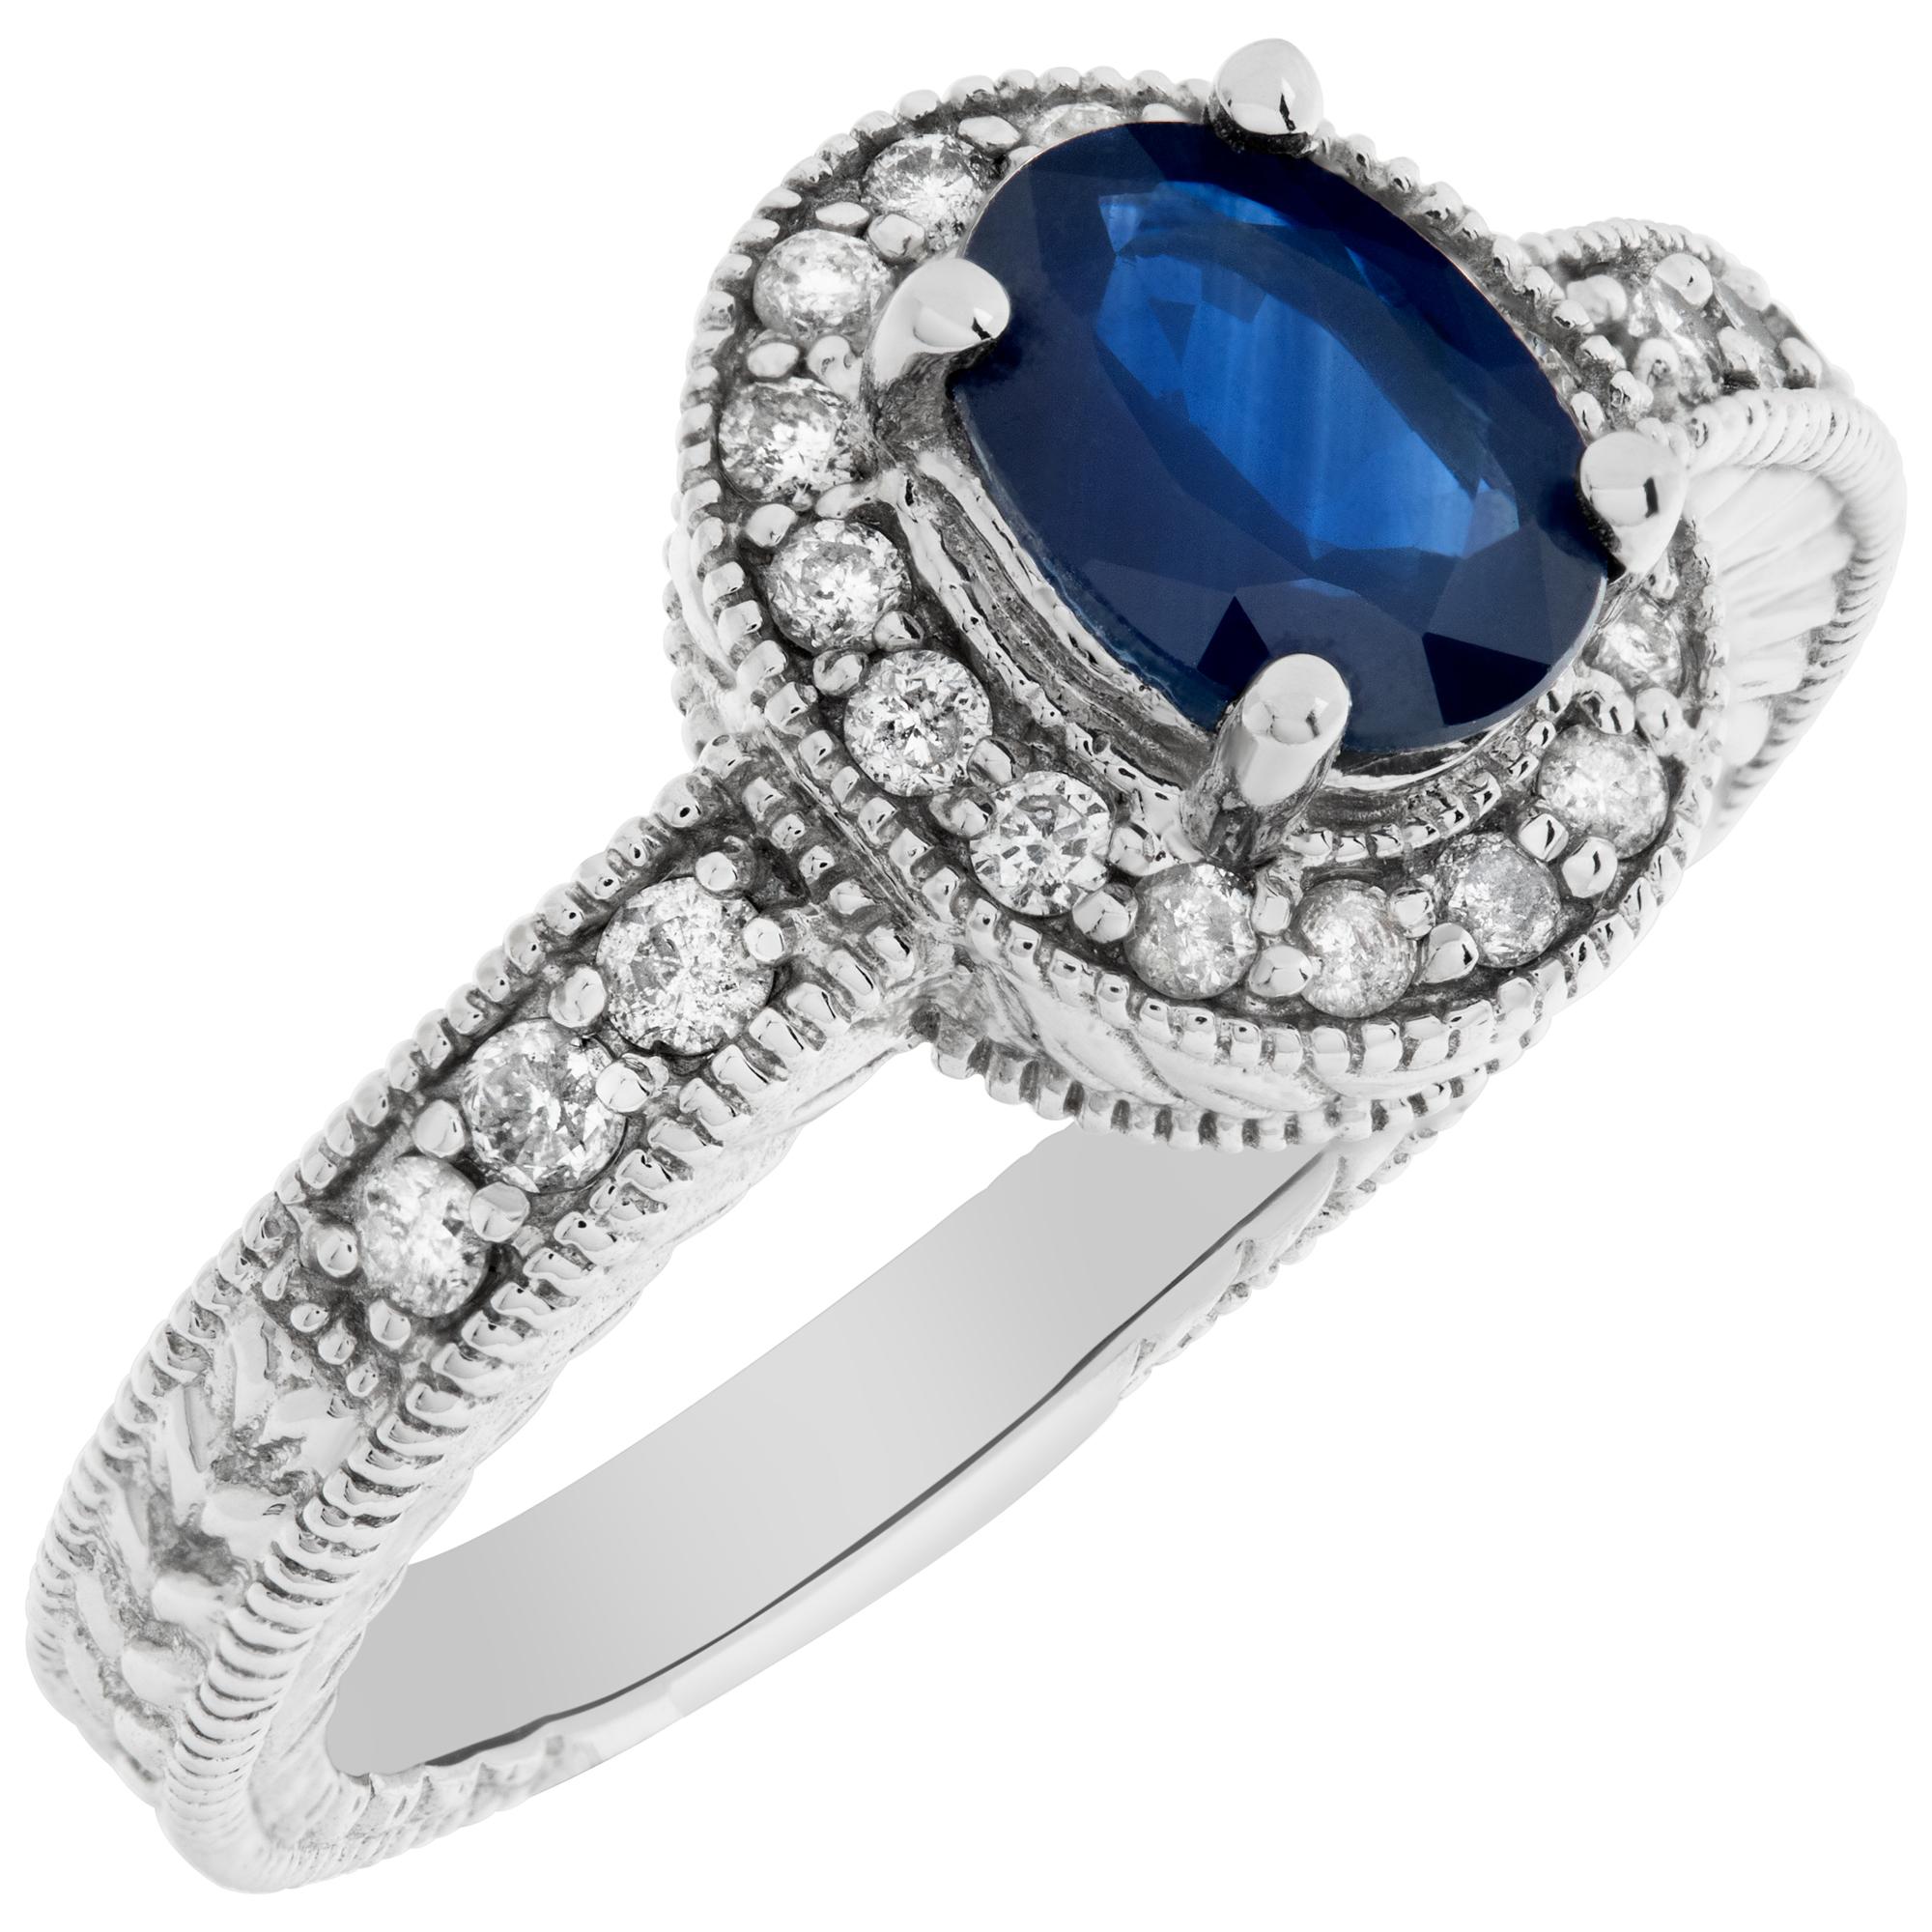 Oval Brilliant Cut Sapphire & Diamonds Ring Set in 14k White Gold In Excellent Condition For Sale In Surfside, FL